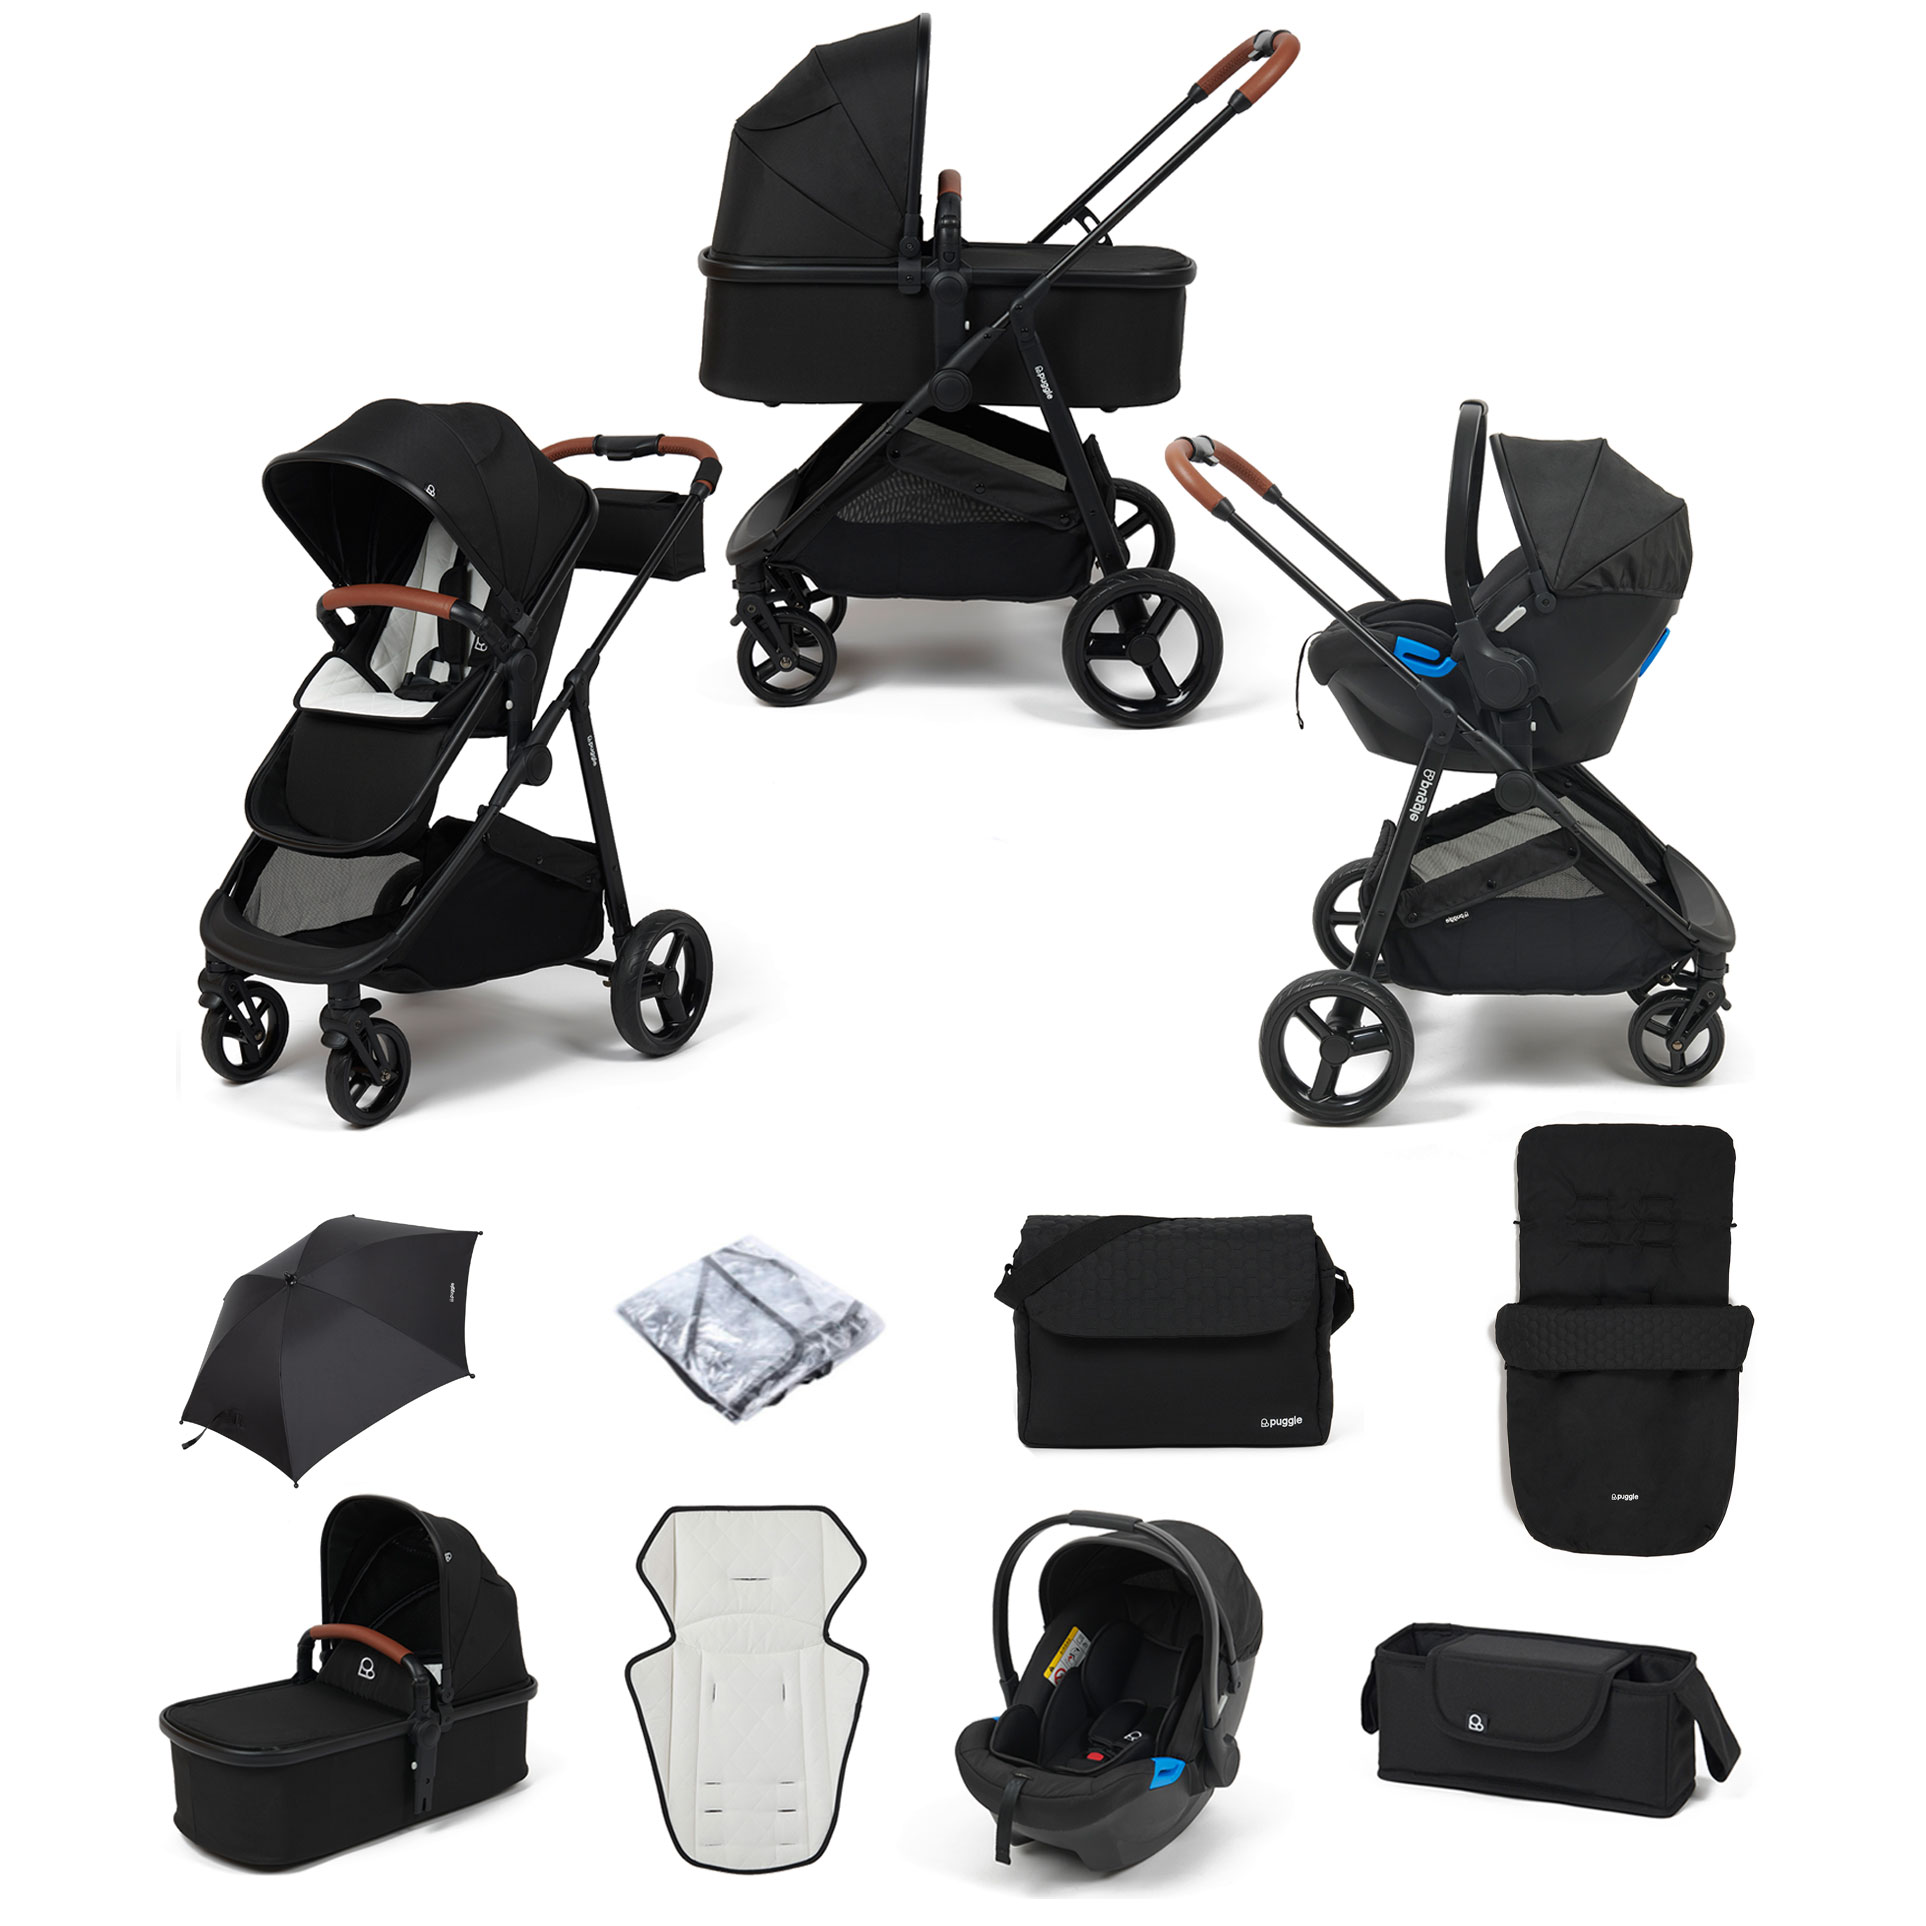 Puggle Monaco XT 3in1 Travel System with Organiser, Footmuff, Parasol & Changing Bag - Storm Black